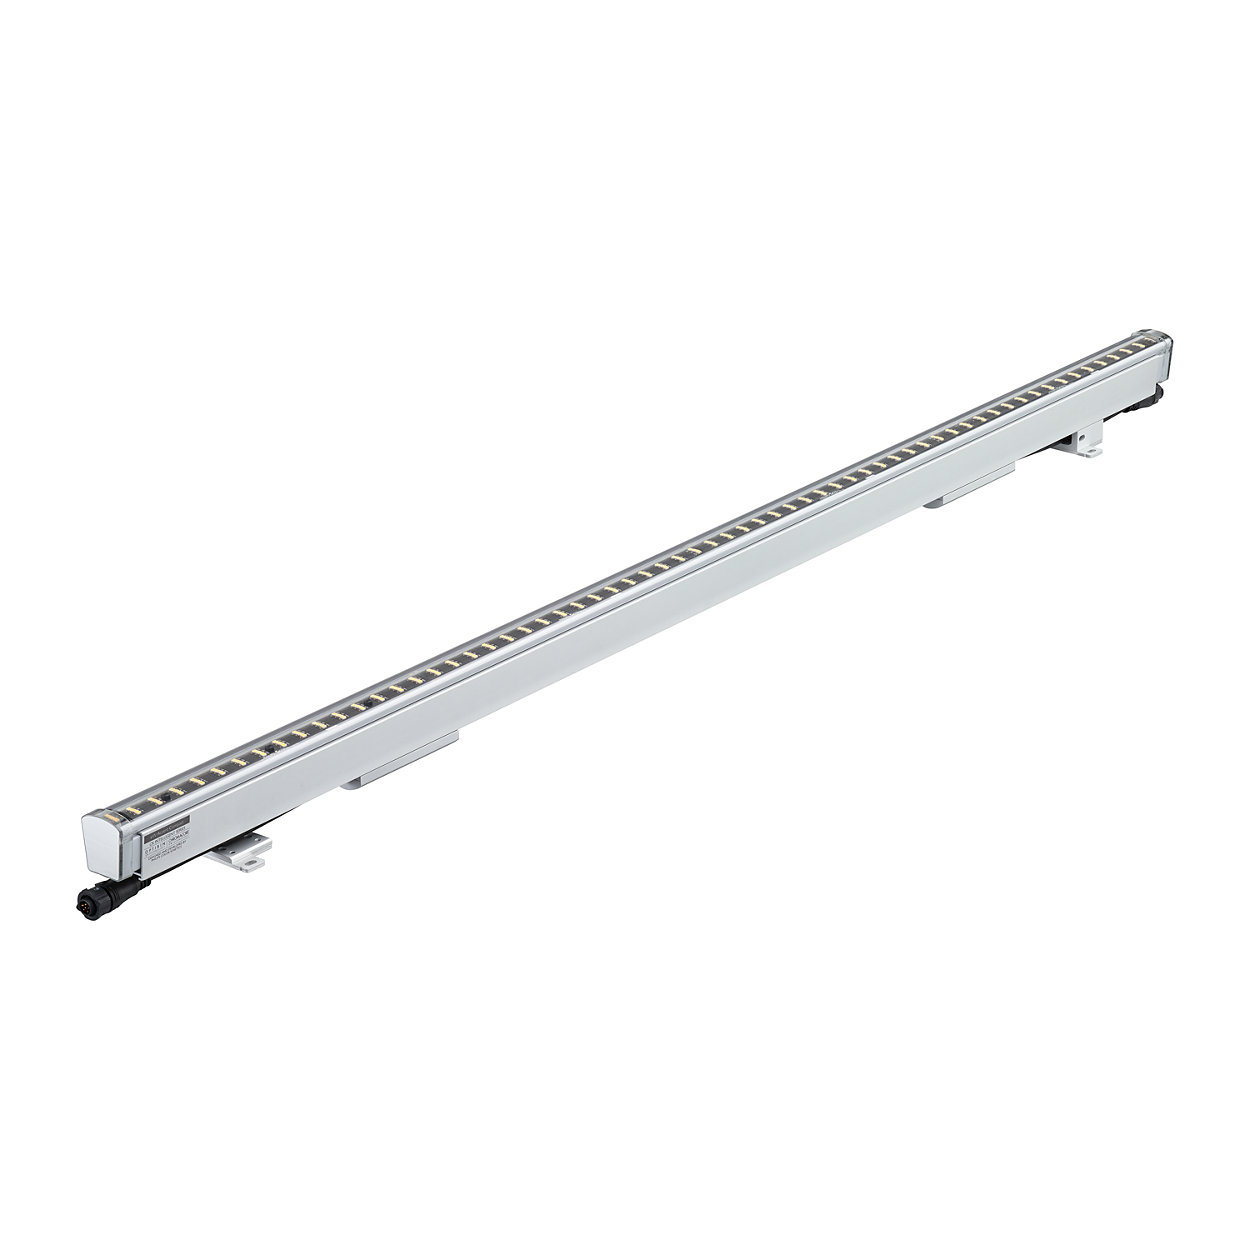 eW Accent Compact - High resolution media direct view linear LED luminaire with solid white light